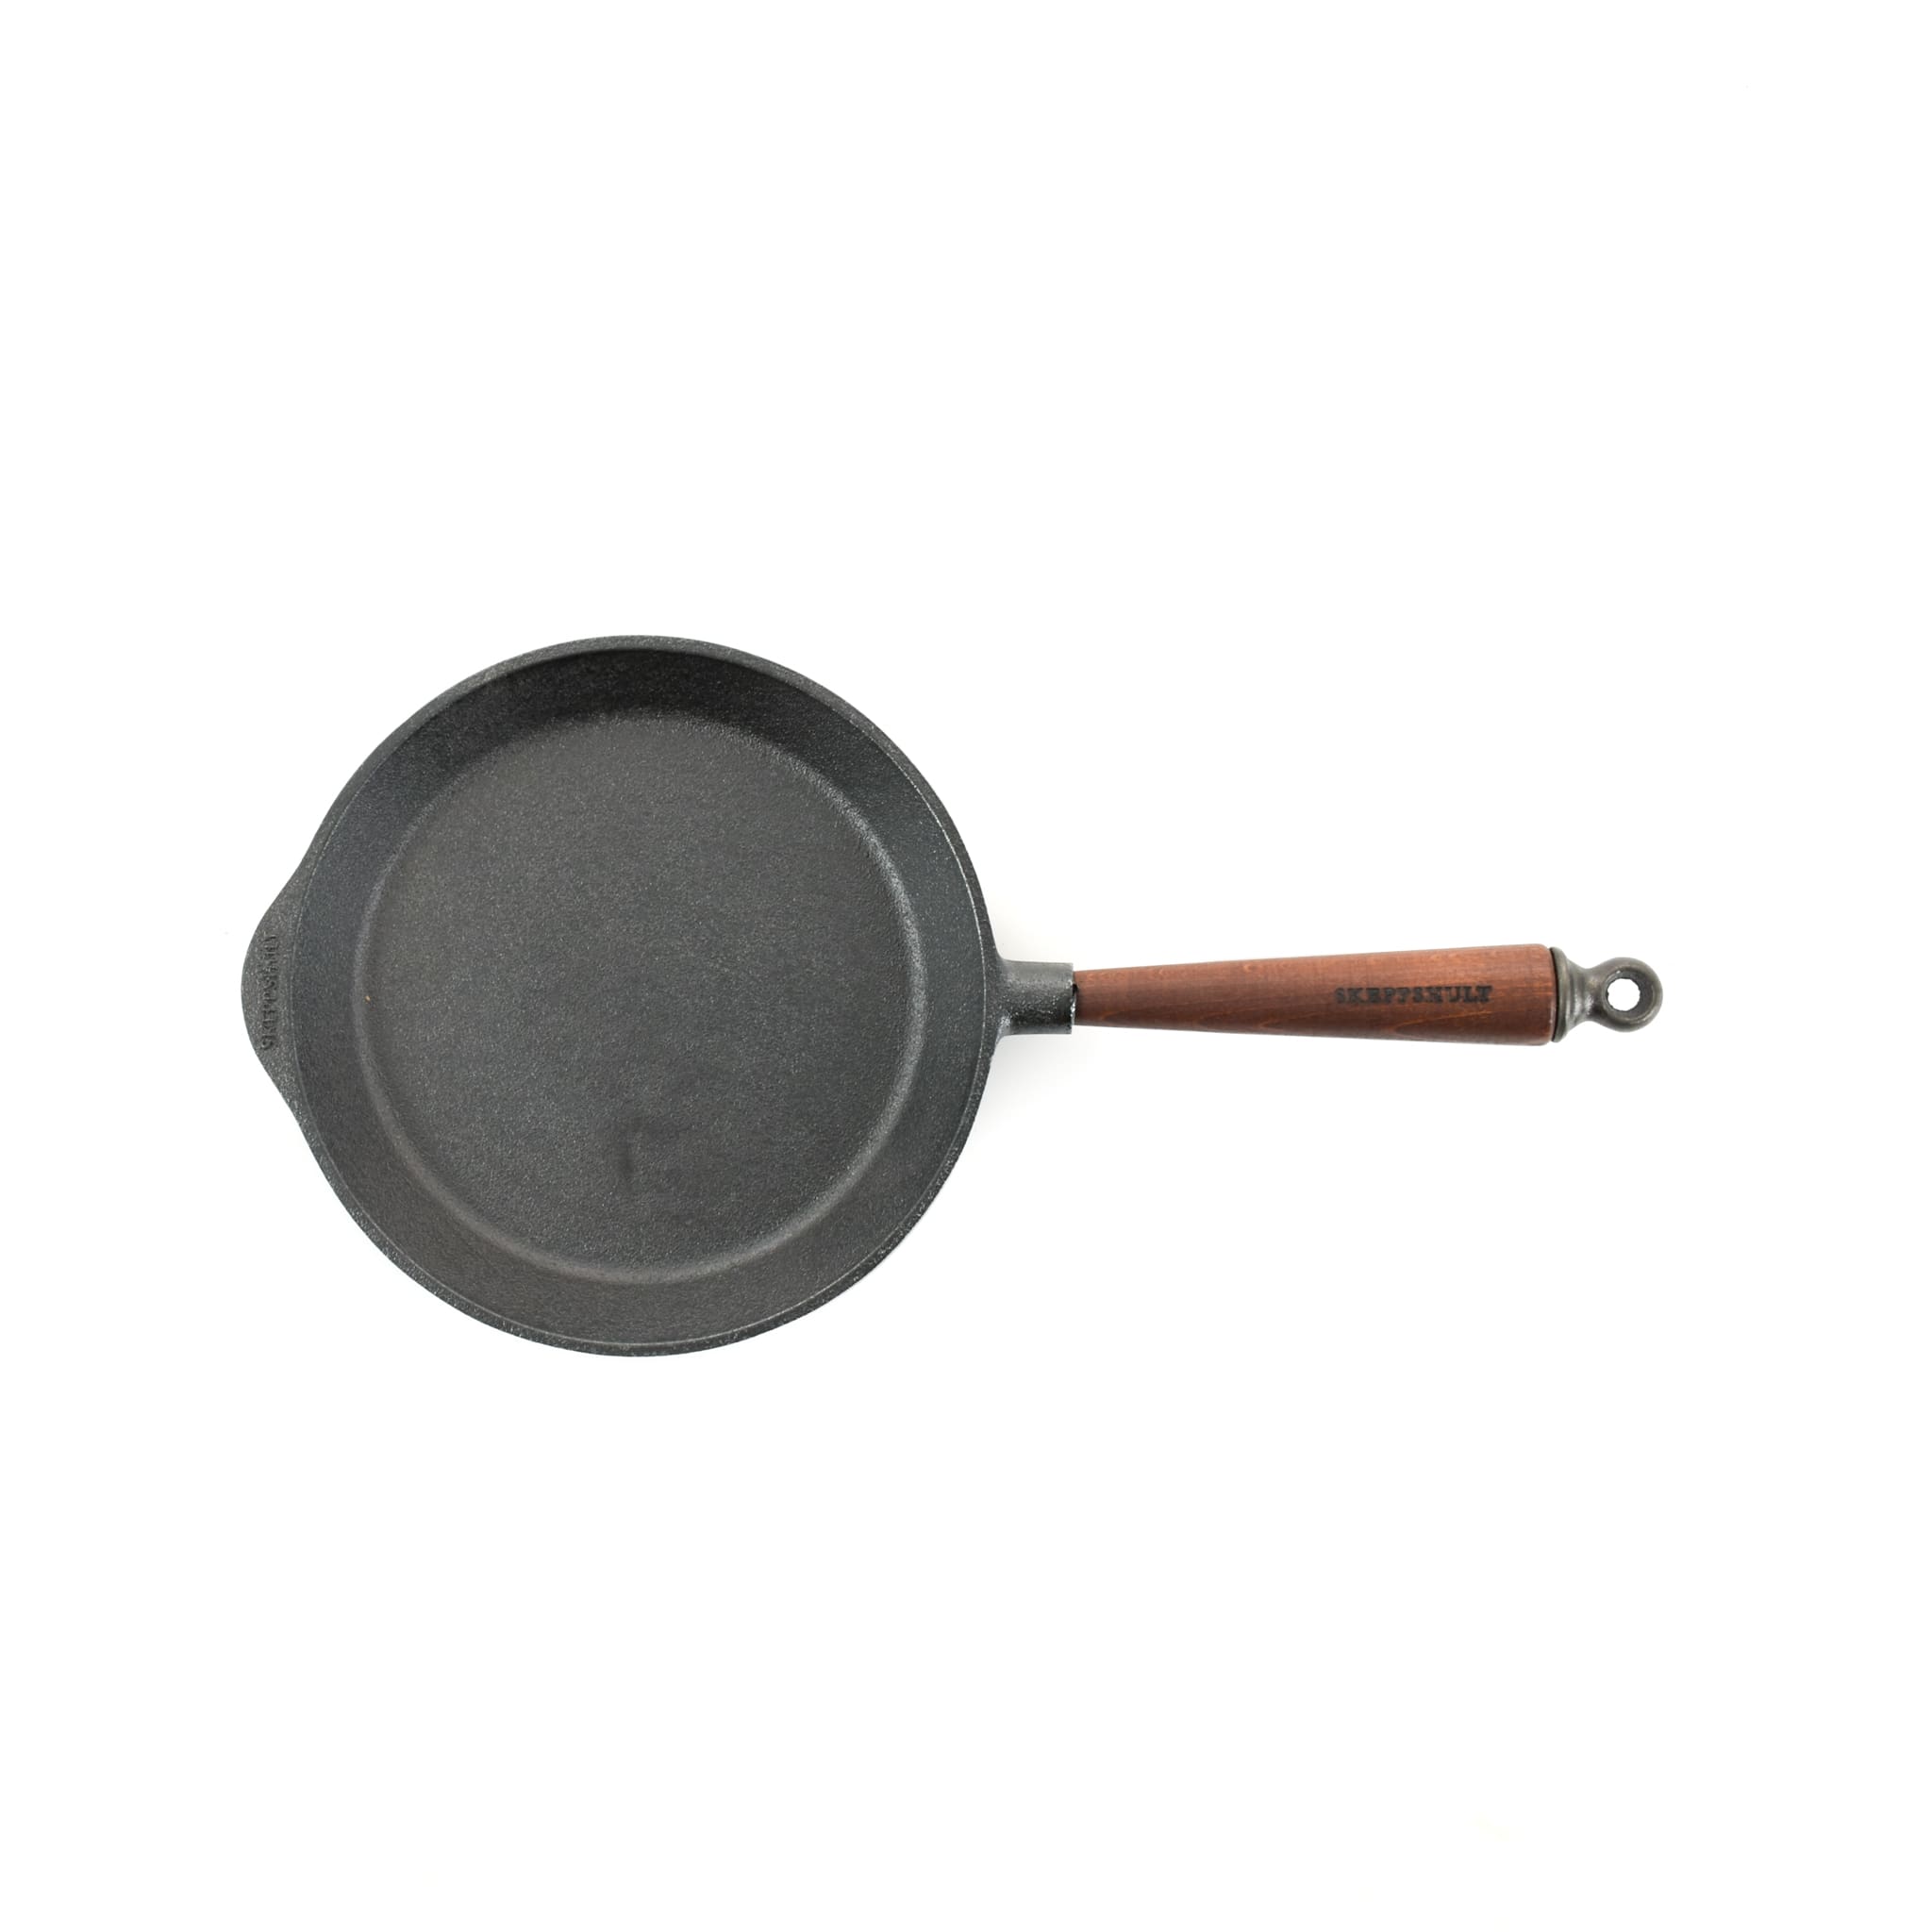 Skeppshult Traditional Cast Iron Frying Pan